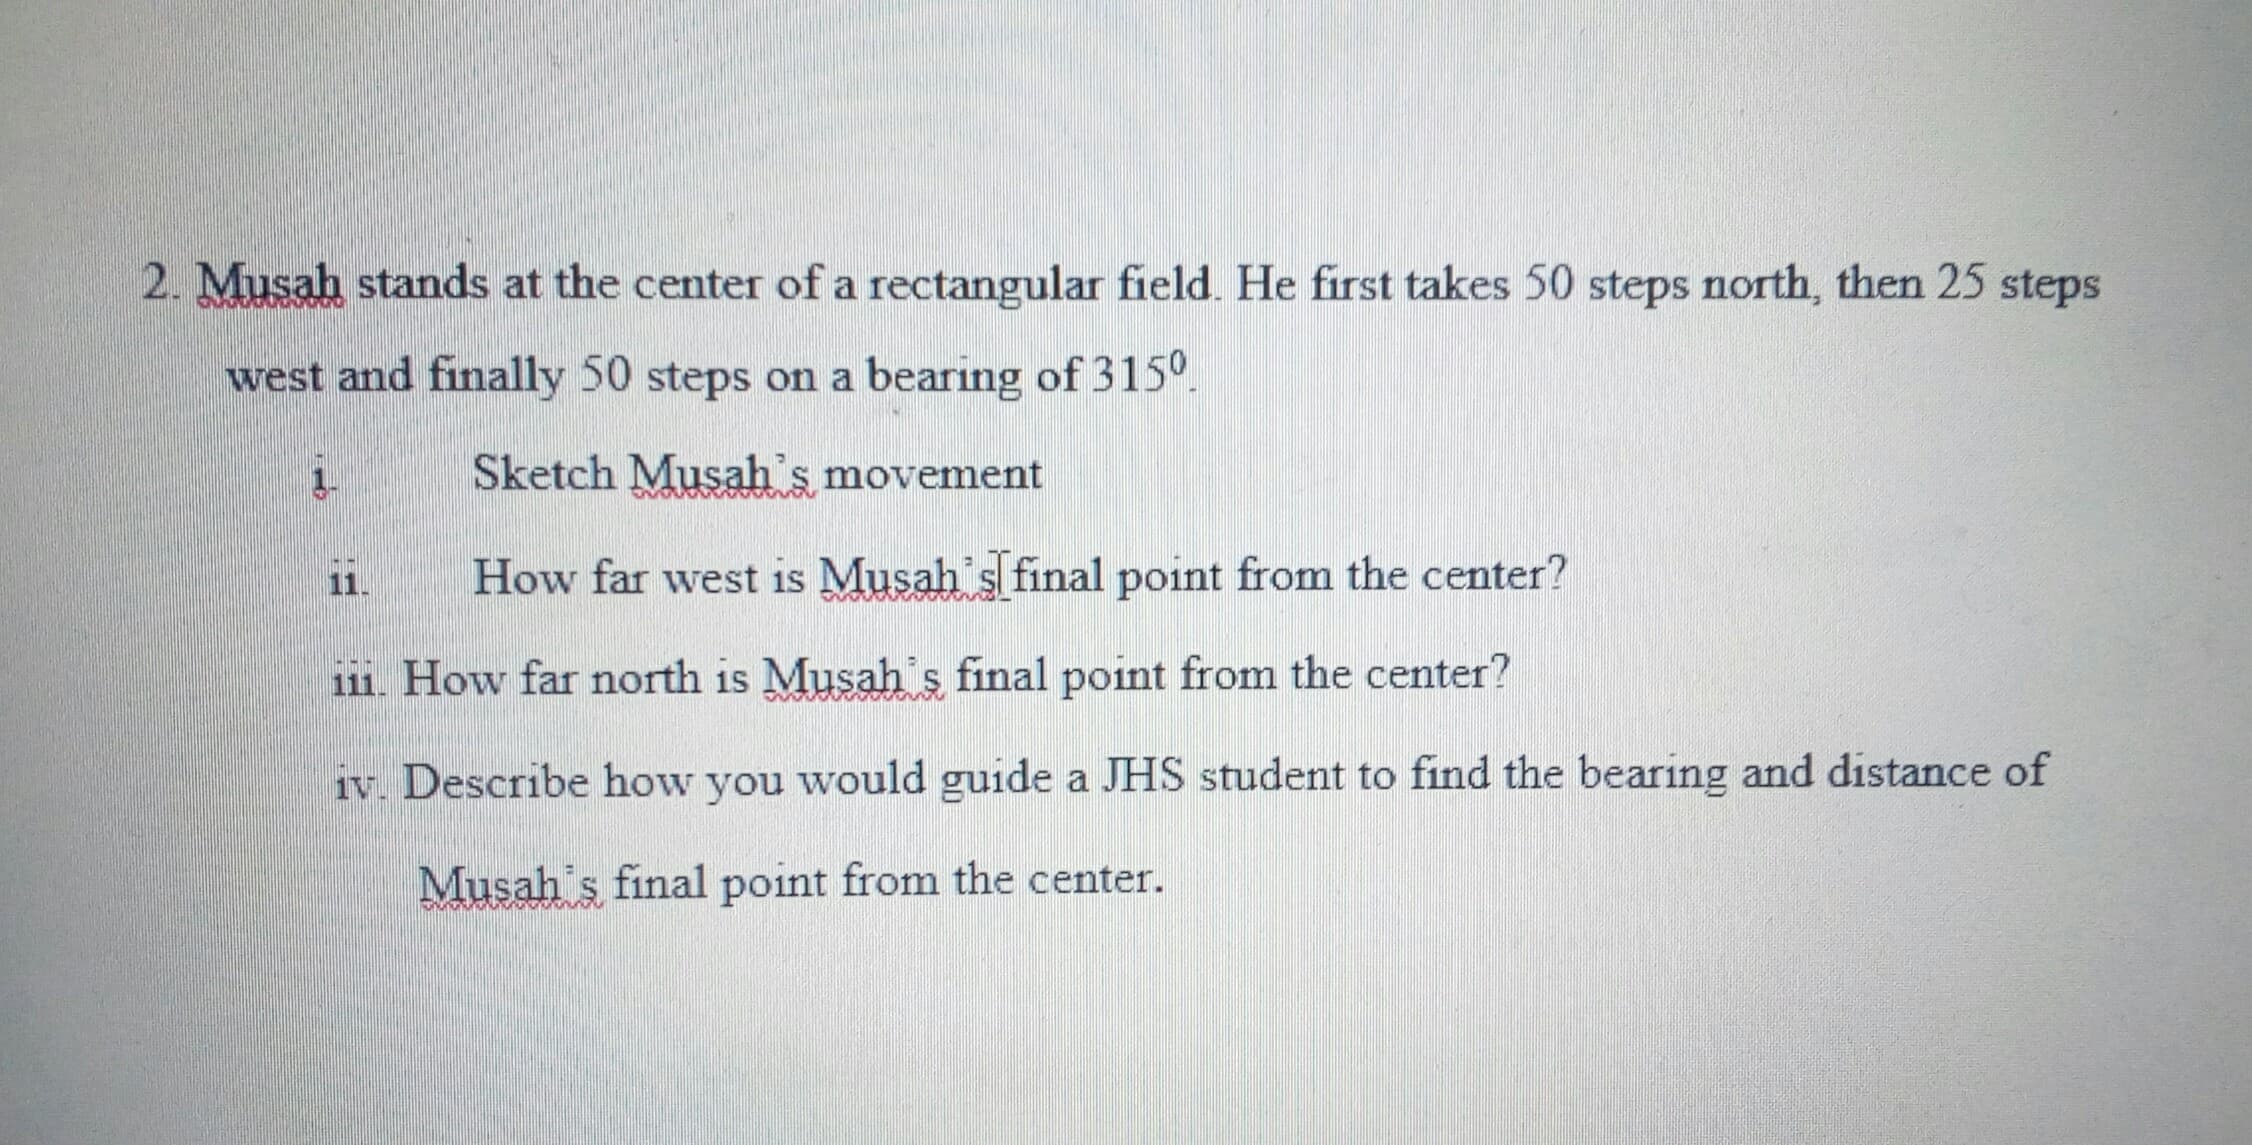 Musah stands at the center of a rectangular field. He first takes 50 steps north, then 25 steps
west and finally 50 steps on a bearing of 315°.
1.
Sketch Musah's movement
11.
How far west is Musah s final point from the center?
111. How far north is Musah's final point from the center?
iv. Describe how you would guide a JHS student to find the bearing and distance of
Musah's final point from the center.
